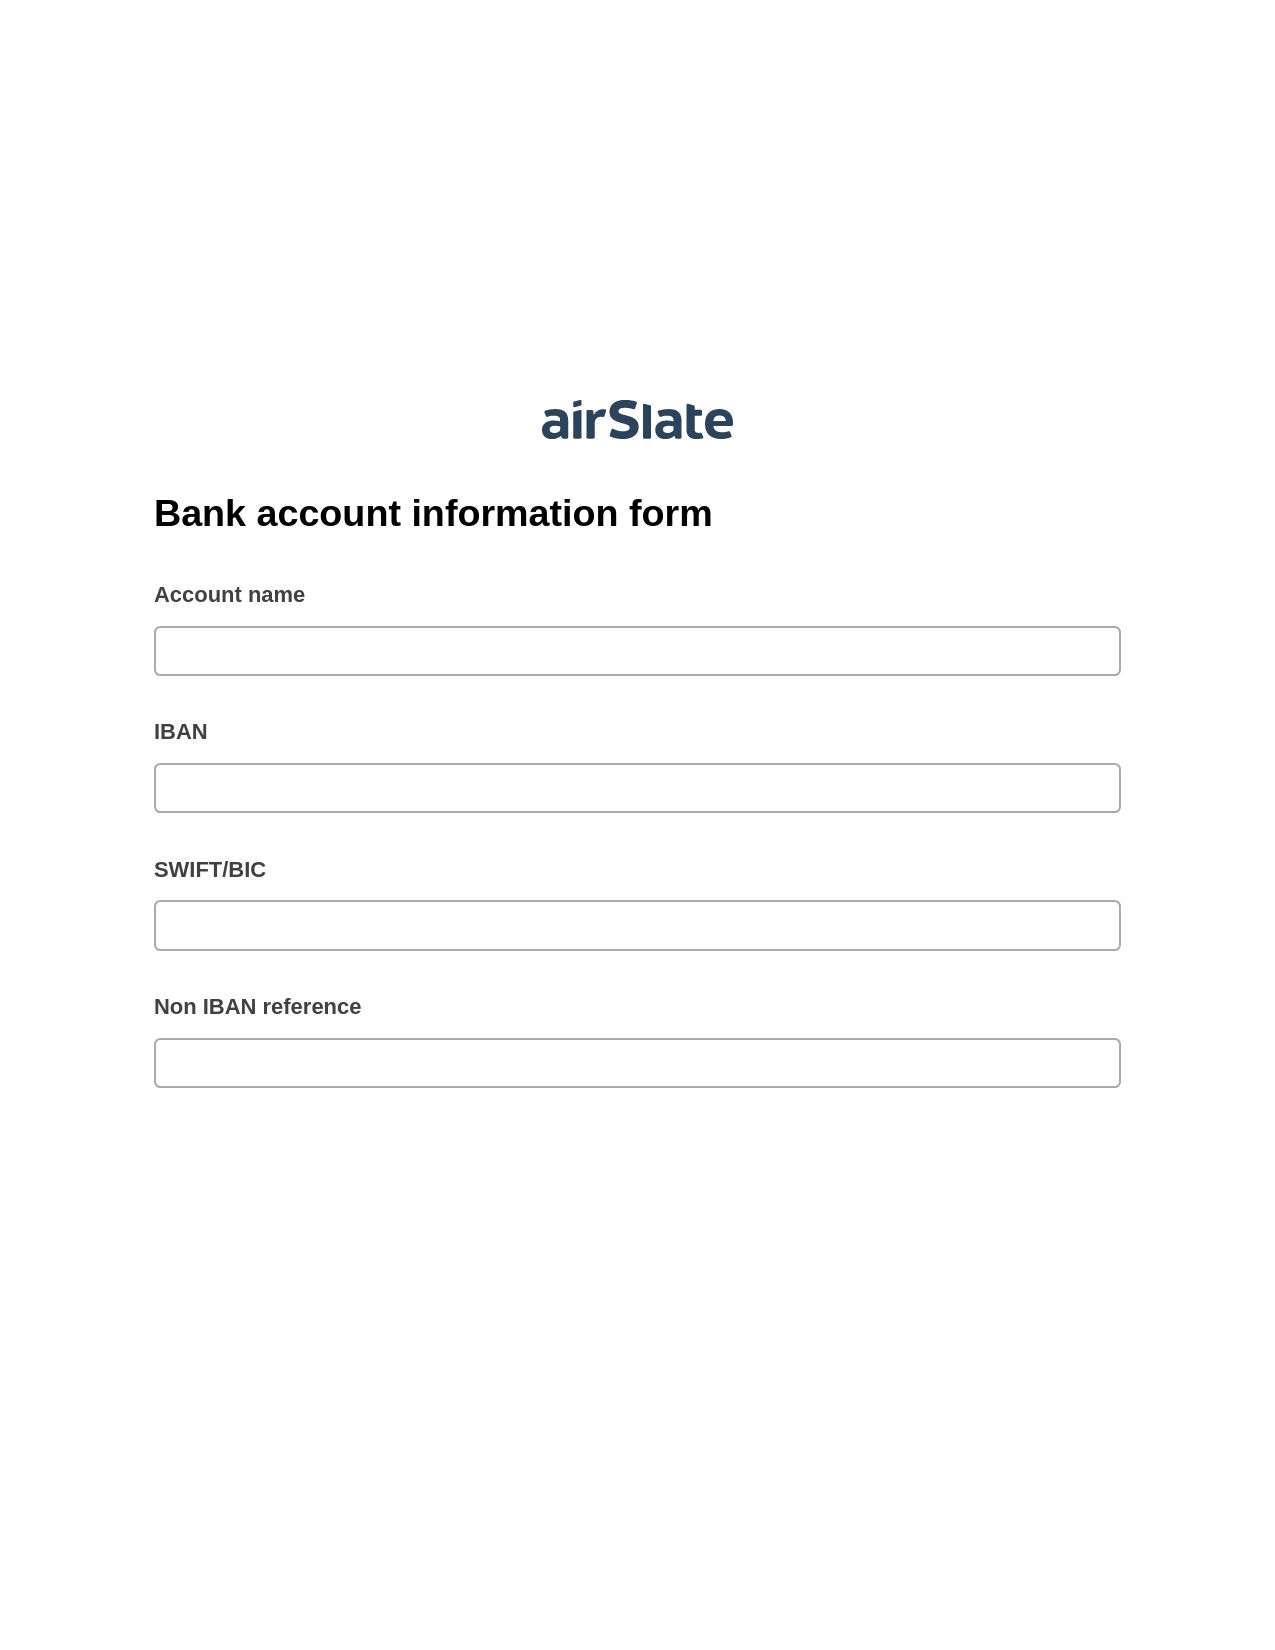 Bank account information form Pre-fill from MySQL Dropdown Options Bot, Update MS Dynamics 365 Record Bot, Export to NetSuite Record Bot